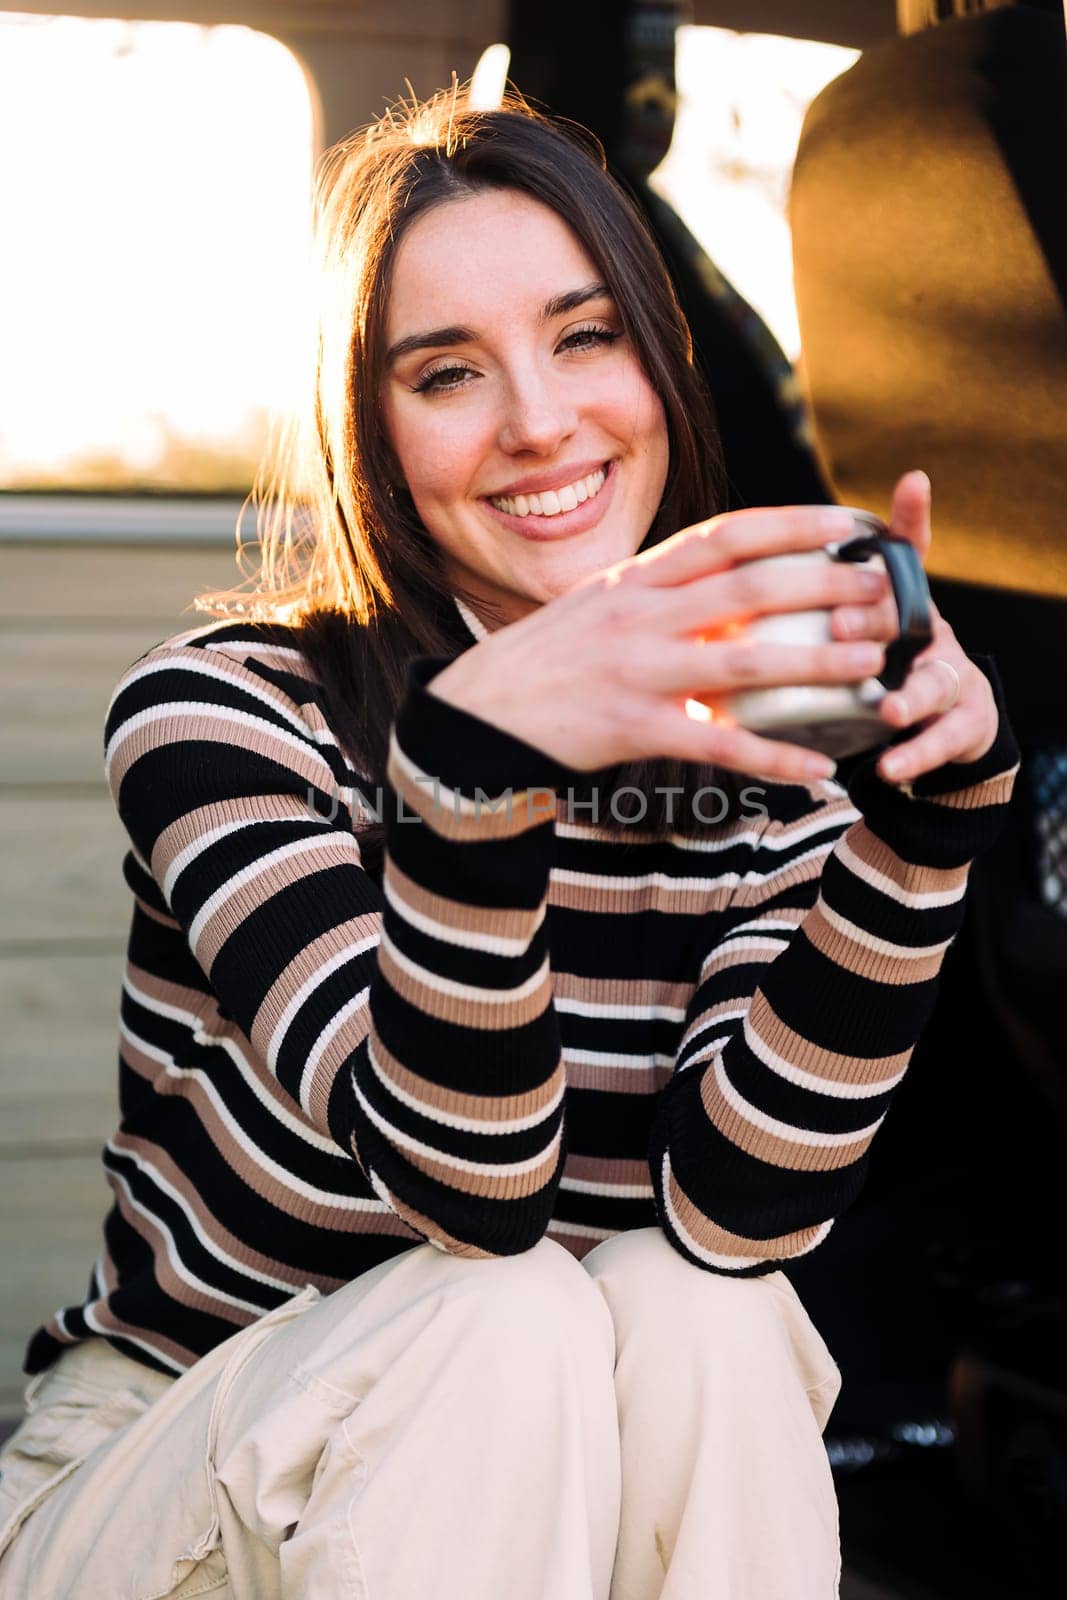 young caucasian woman smiling happy at sunset relaxing in a camper van with a cup of a hot drink her hand, concept of van life and weekend getaway